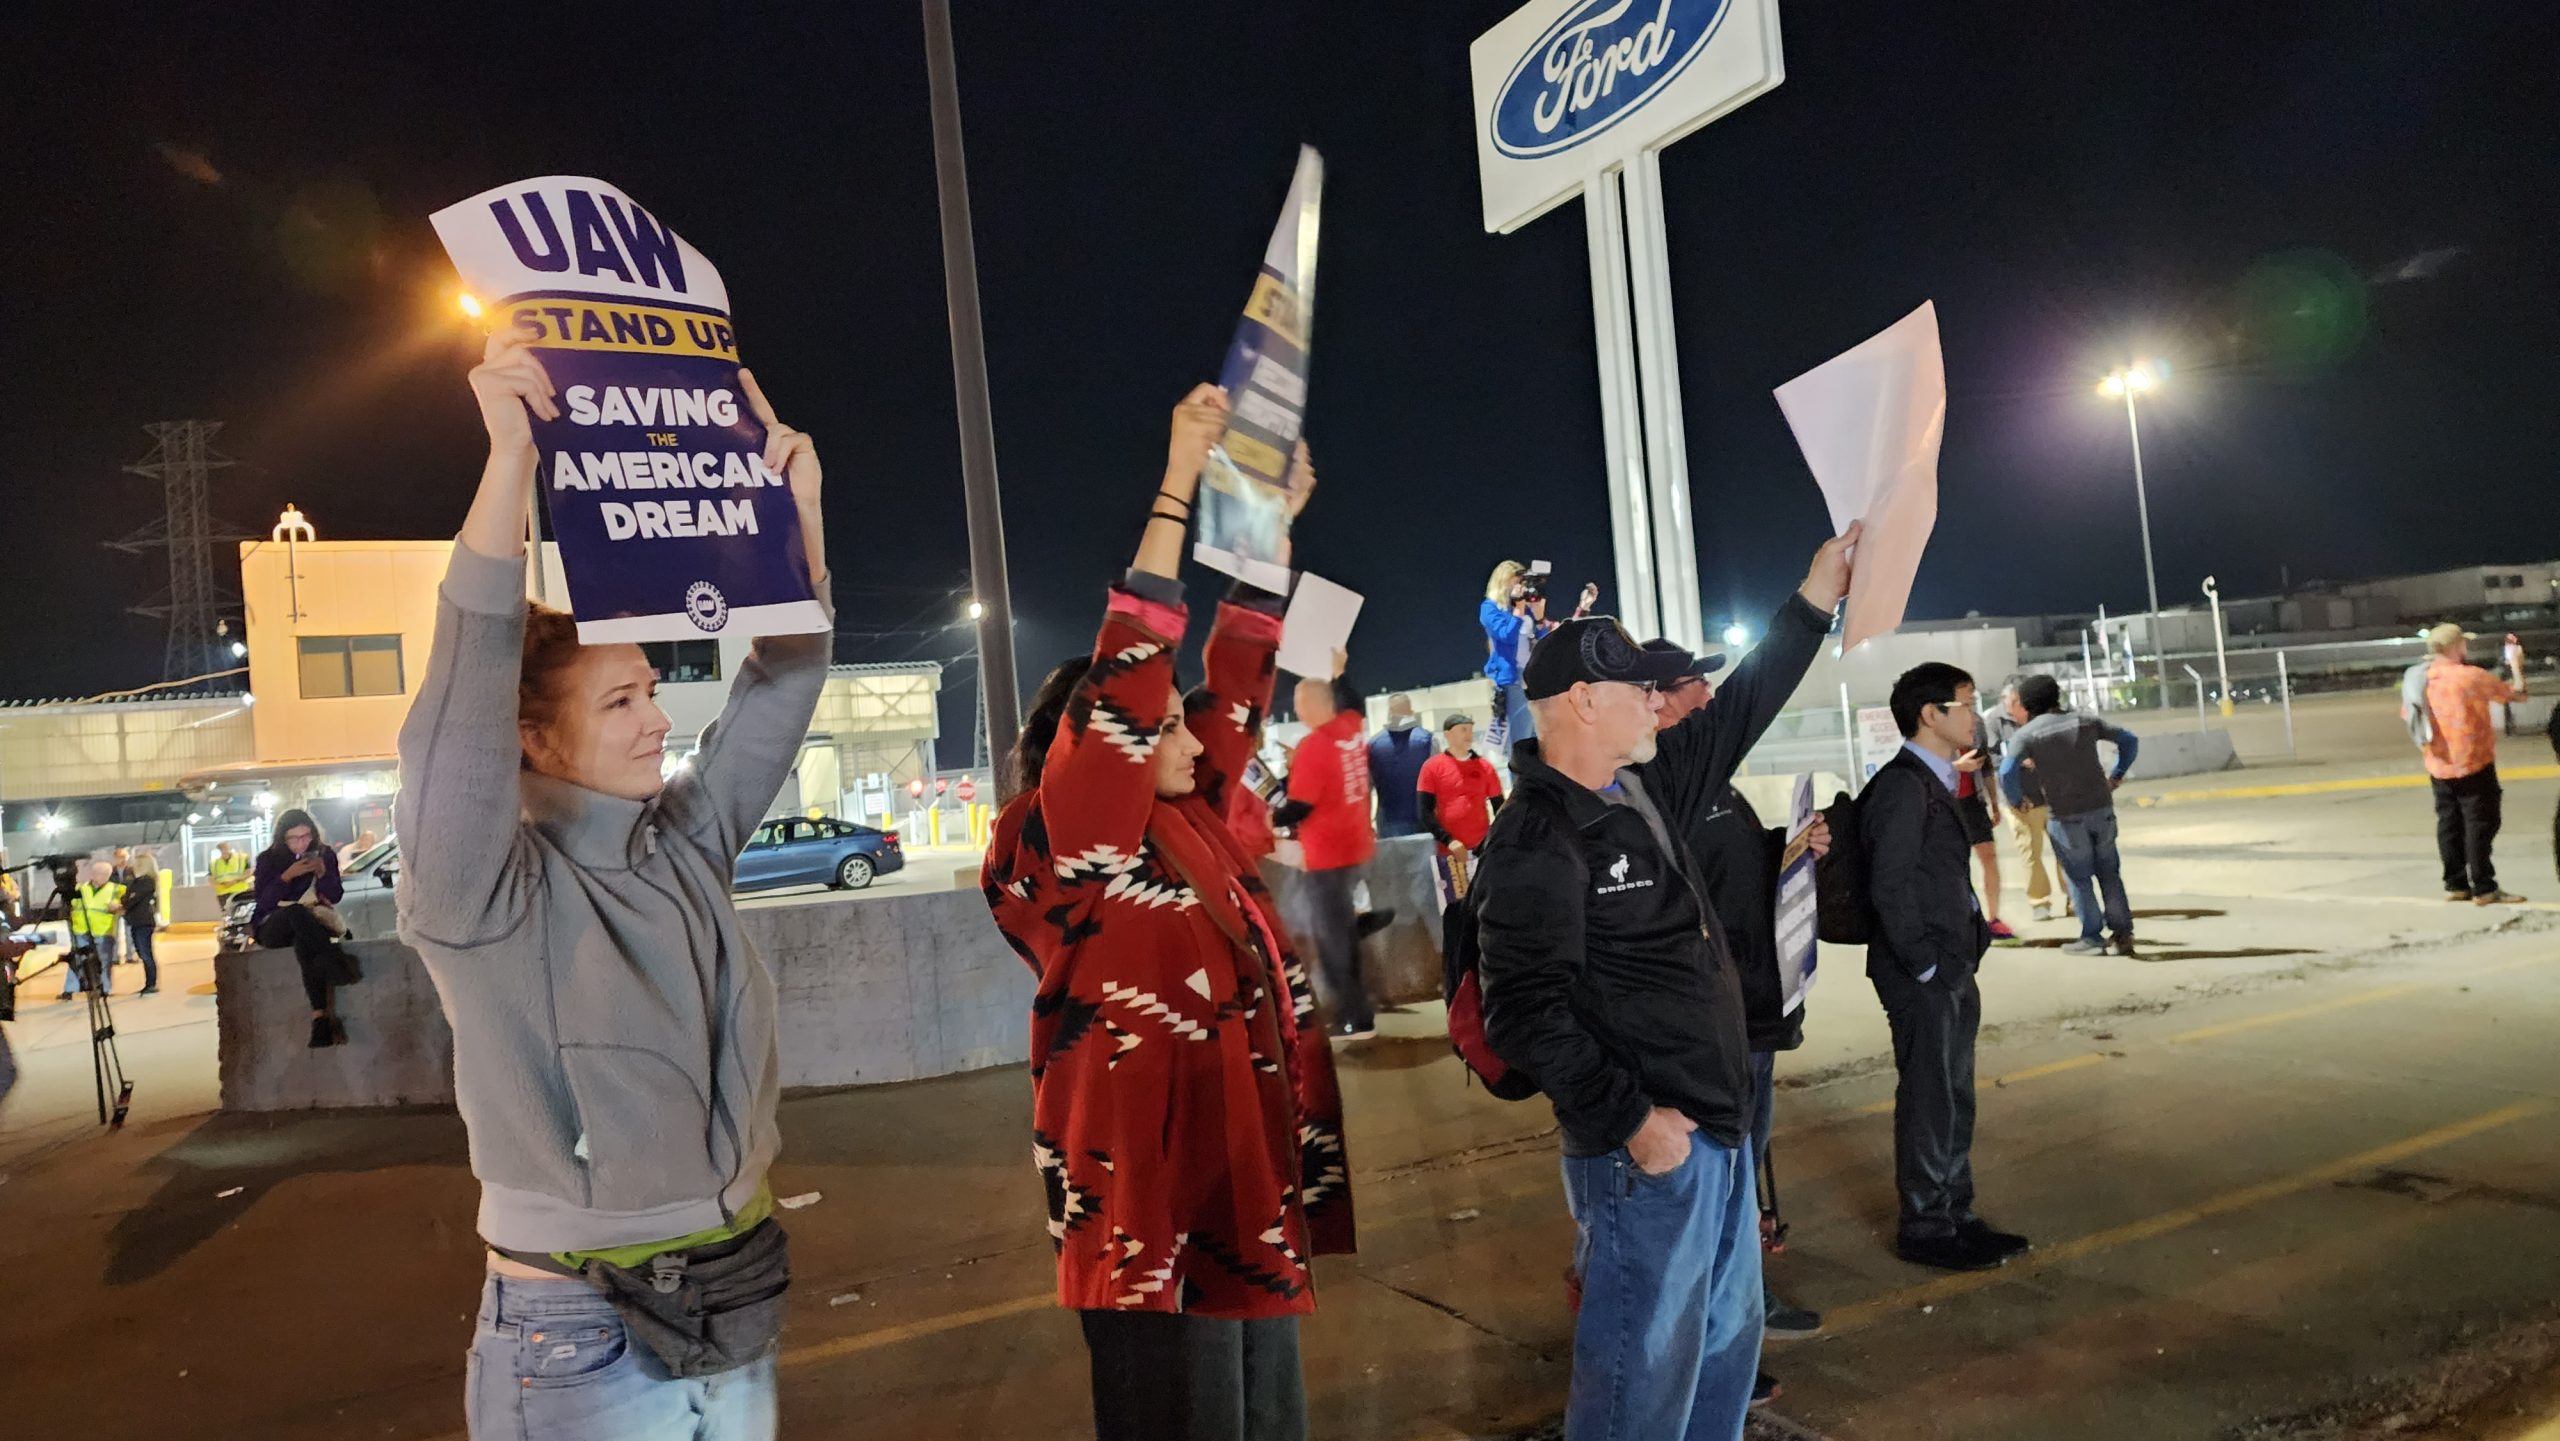 UAW members picket outside Ford's assembly plant in Wayne, Mich.